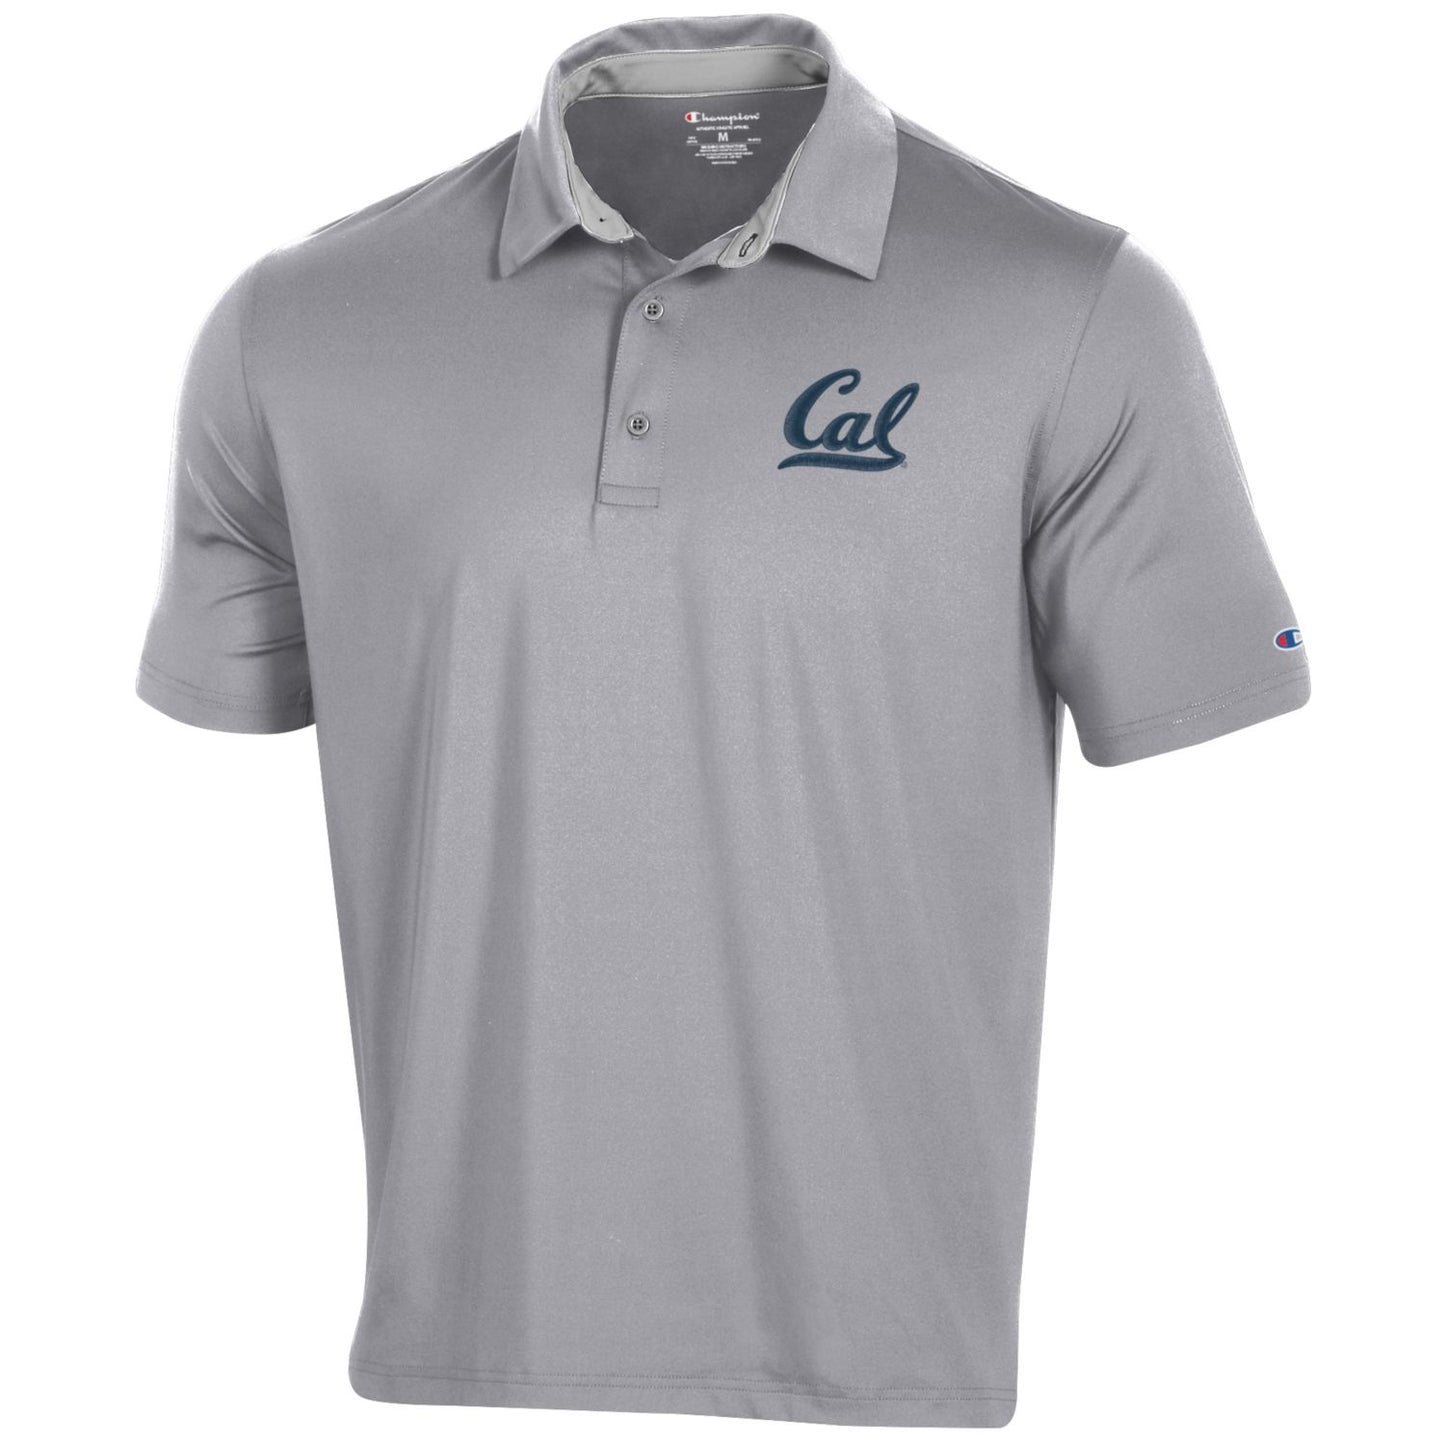 U.C. Berkeley Cal embroidered Champion Dry Performance Polo shirt-Gray-Shop College Wear